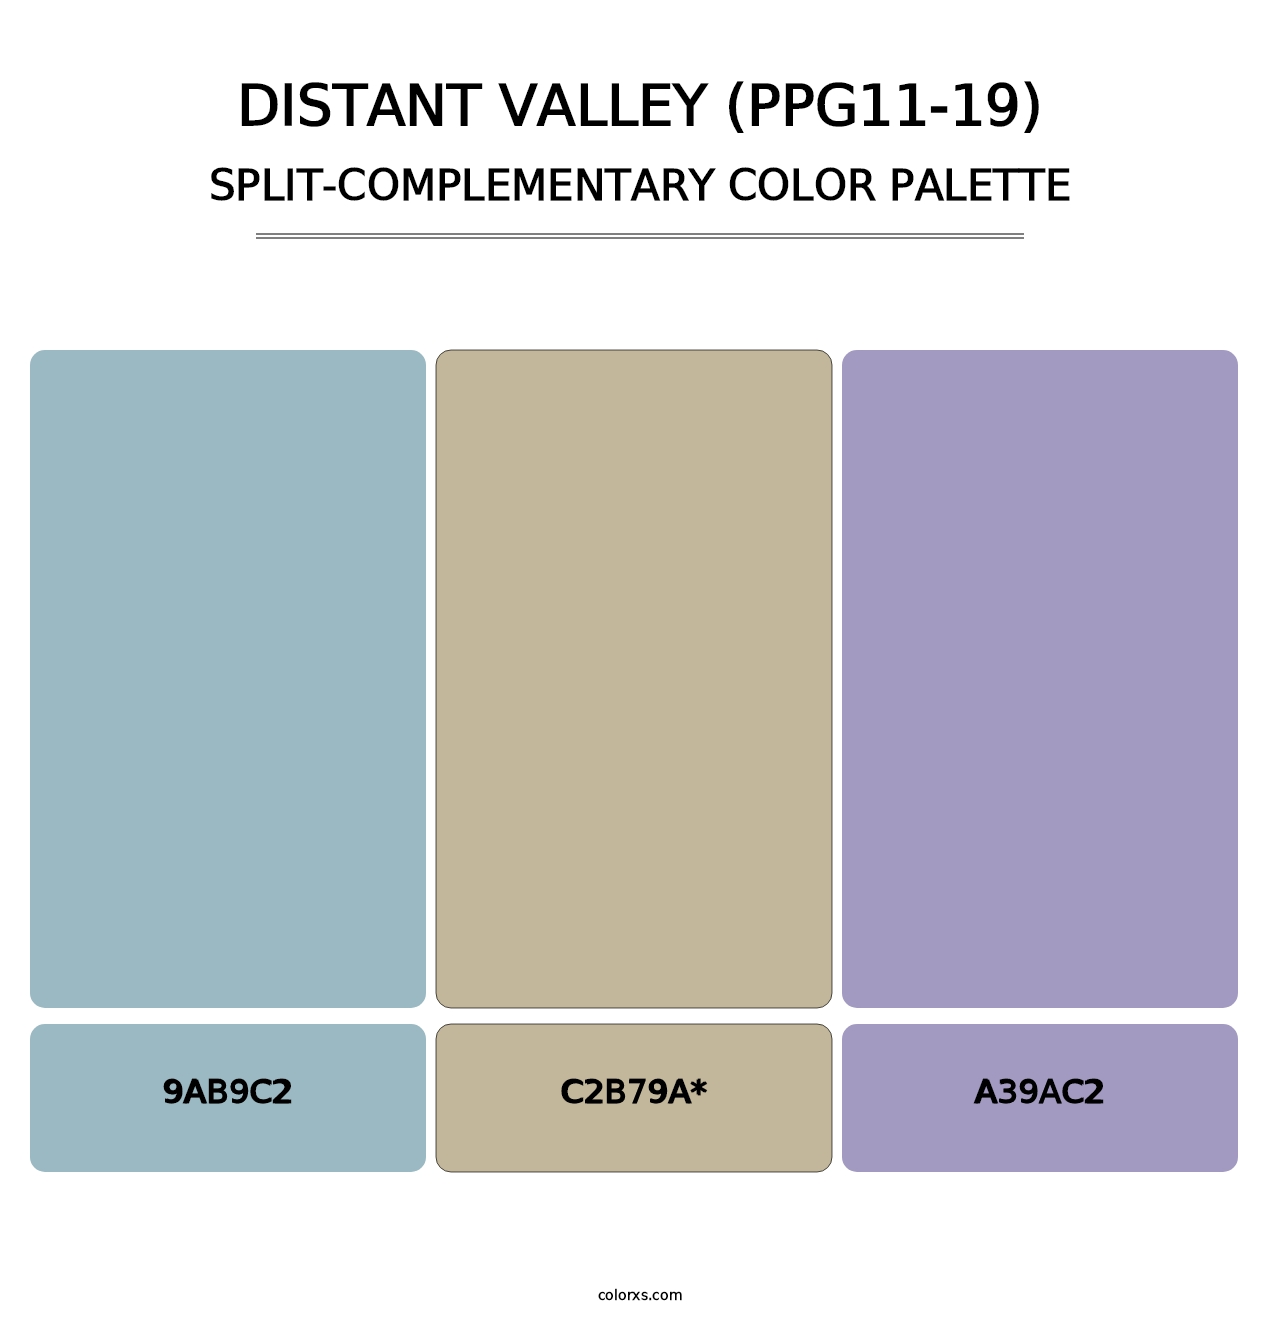 Distant Valley (PPG11-19) - Split-Complementary Color Palette